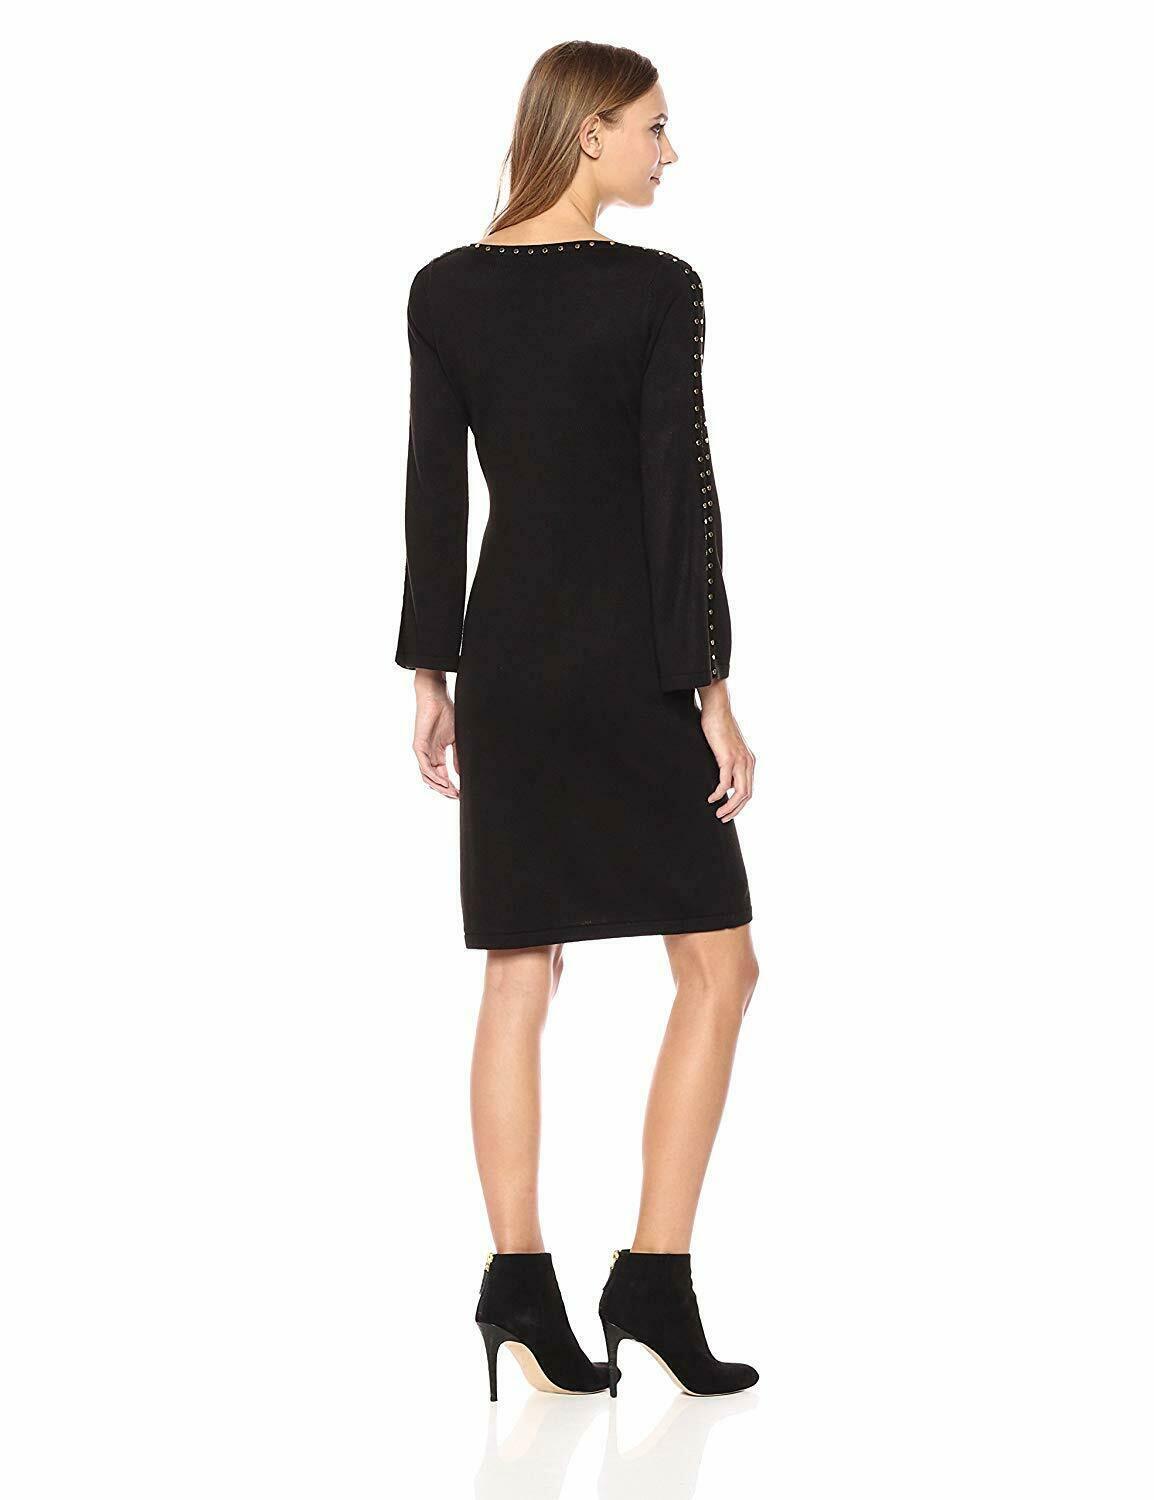 Calvin Klein Women's Sweater Dress with Gold Embellishment Size M - SVNYFancy